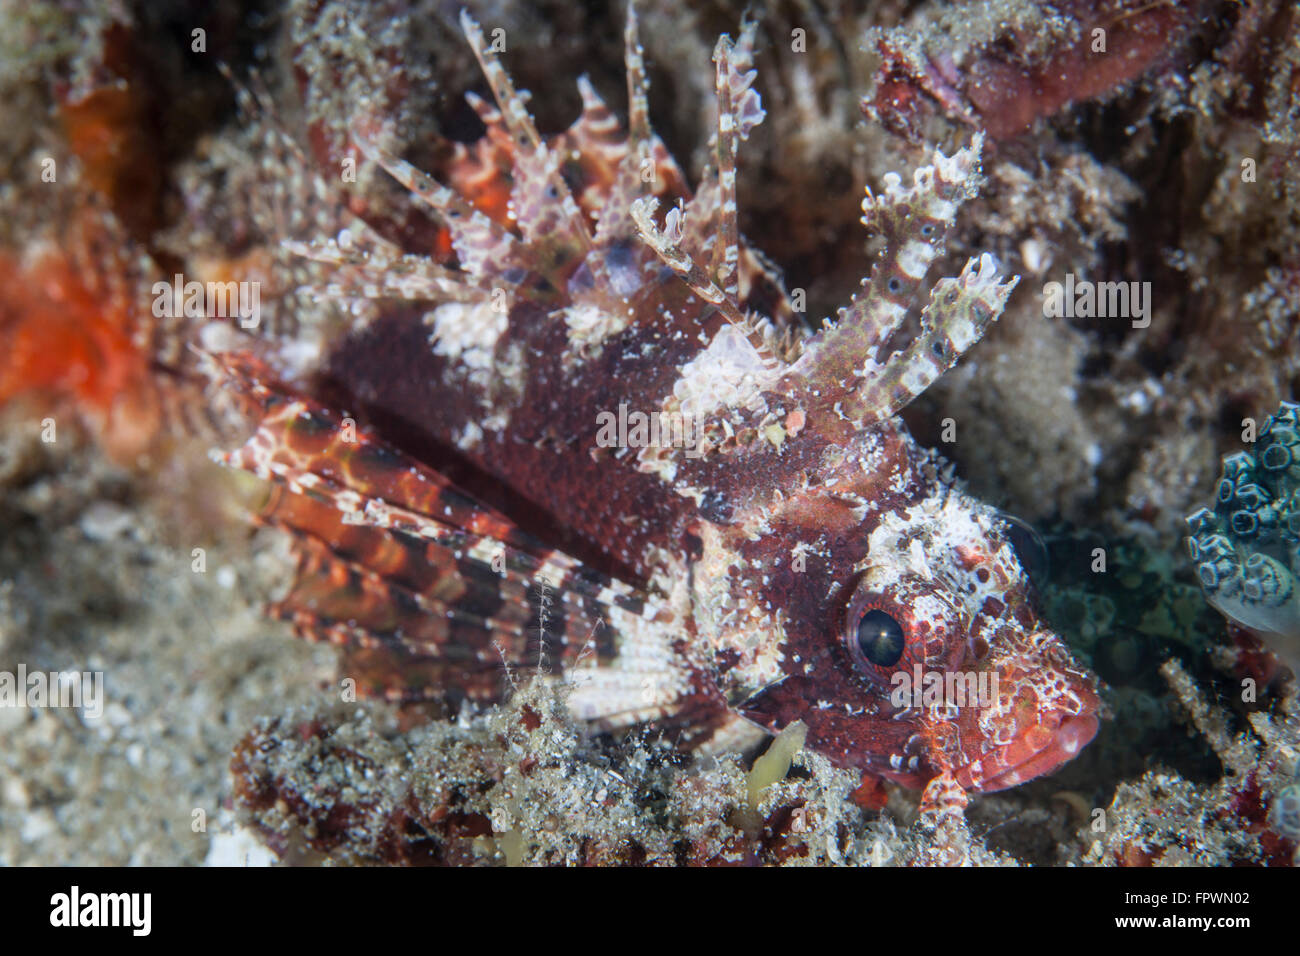 A shortfin lionfish (Dendrochirus brachypterus) lays on the seafloor waiting for prey to swim near in Indonesia. This tropical r Stock Photo